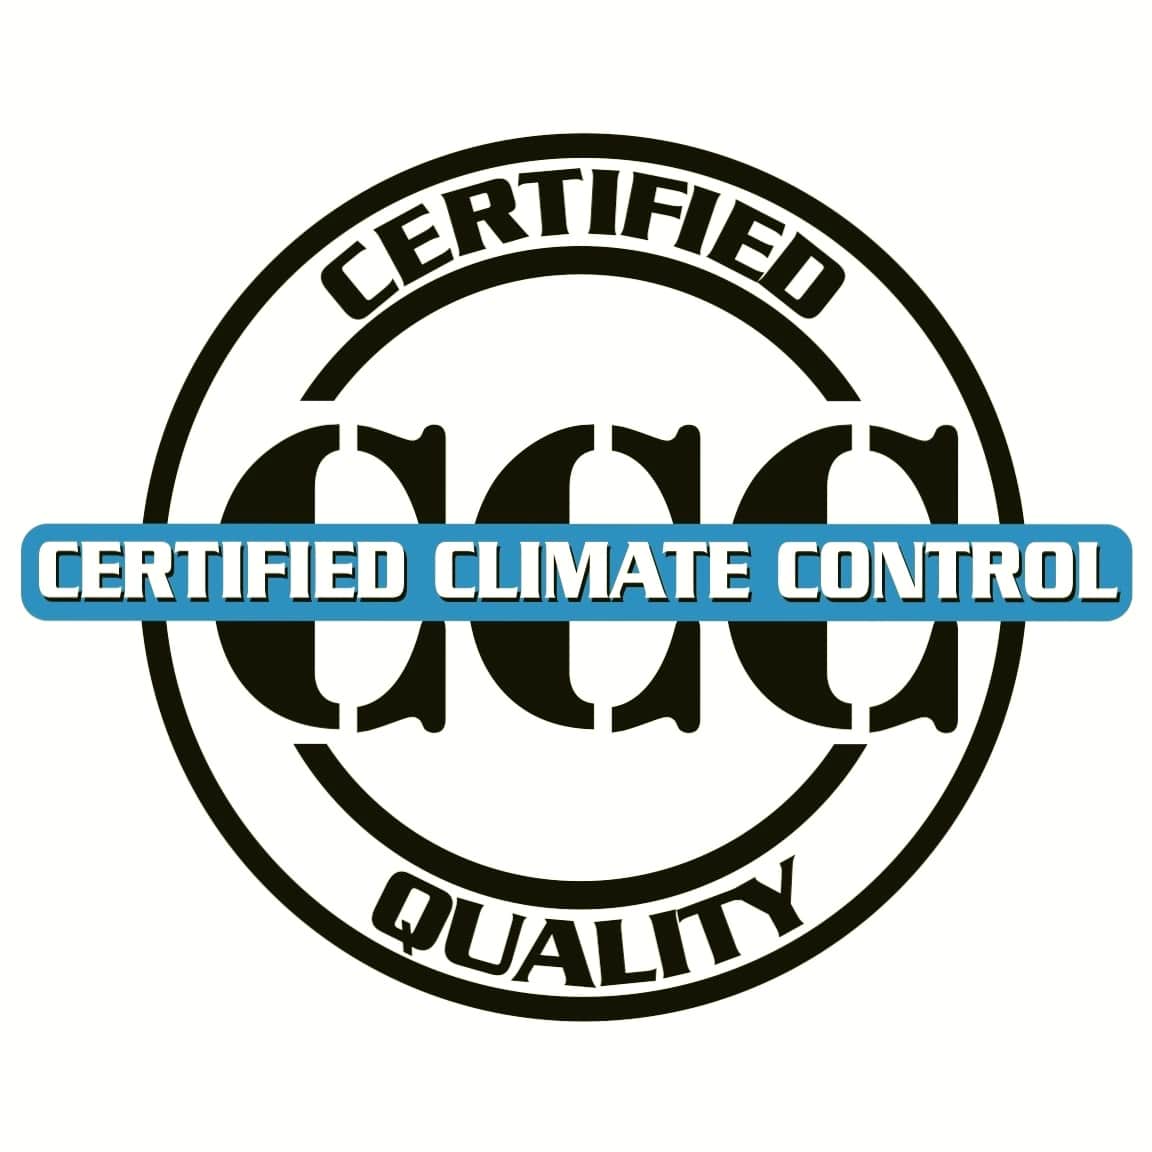 Certified Climate Control logo